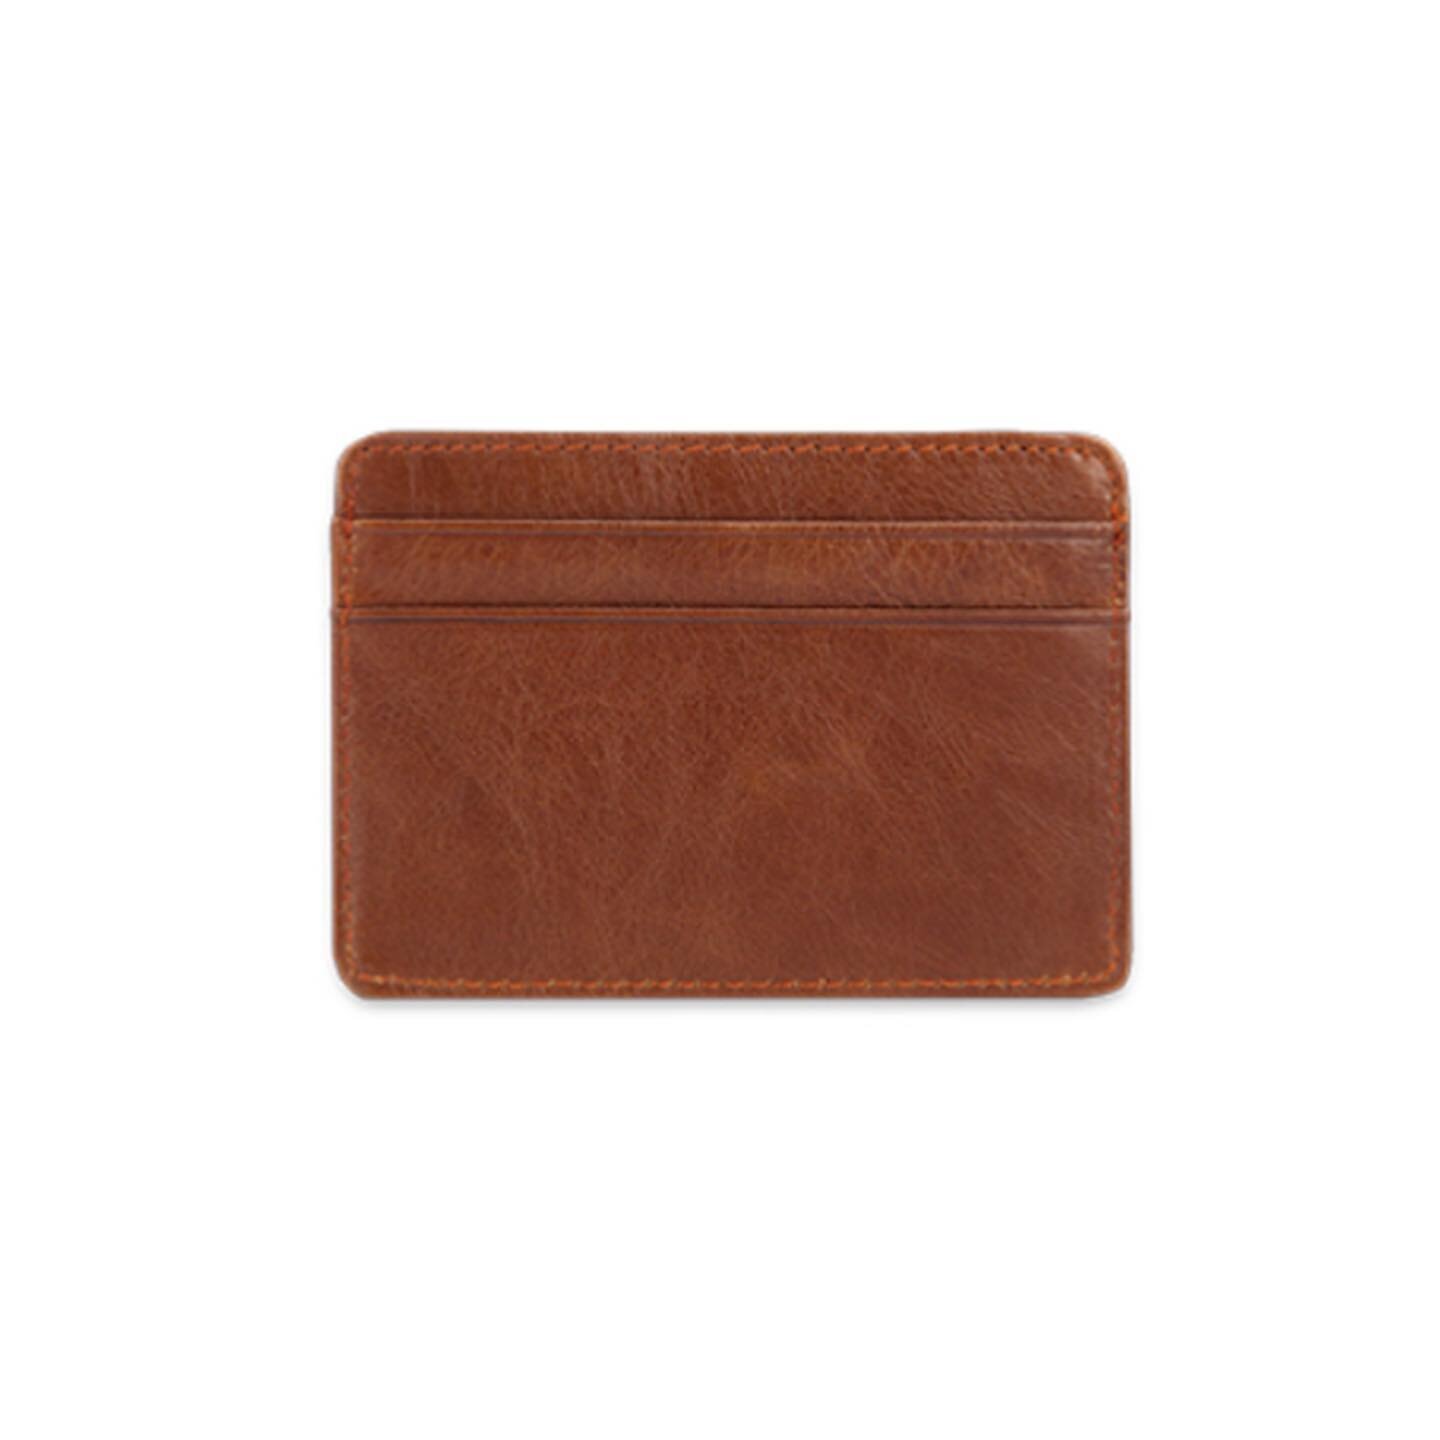 Keeping it simple yet effective. With Our new Leather Slim cardholder Wallet can hold up to 8 cards and quick access pocket for folded bills. Comes in a variety of colors. #Wearemanmade #manmadeapparel #fashion #menswear #fallstyle #style #fashion